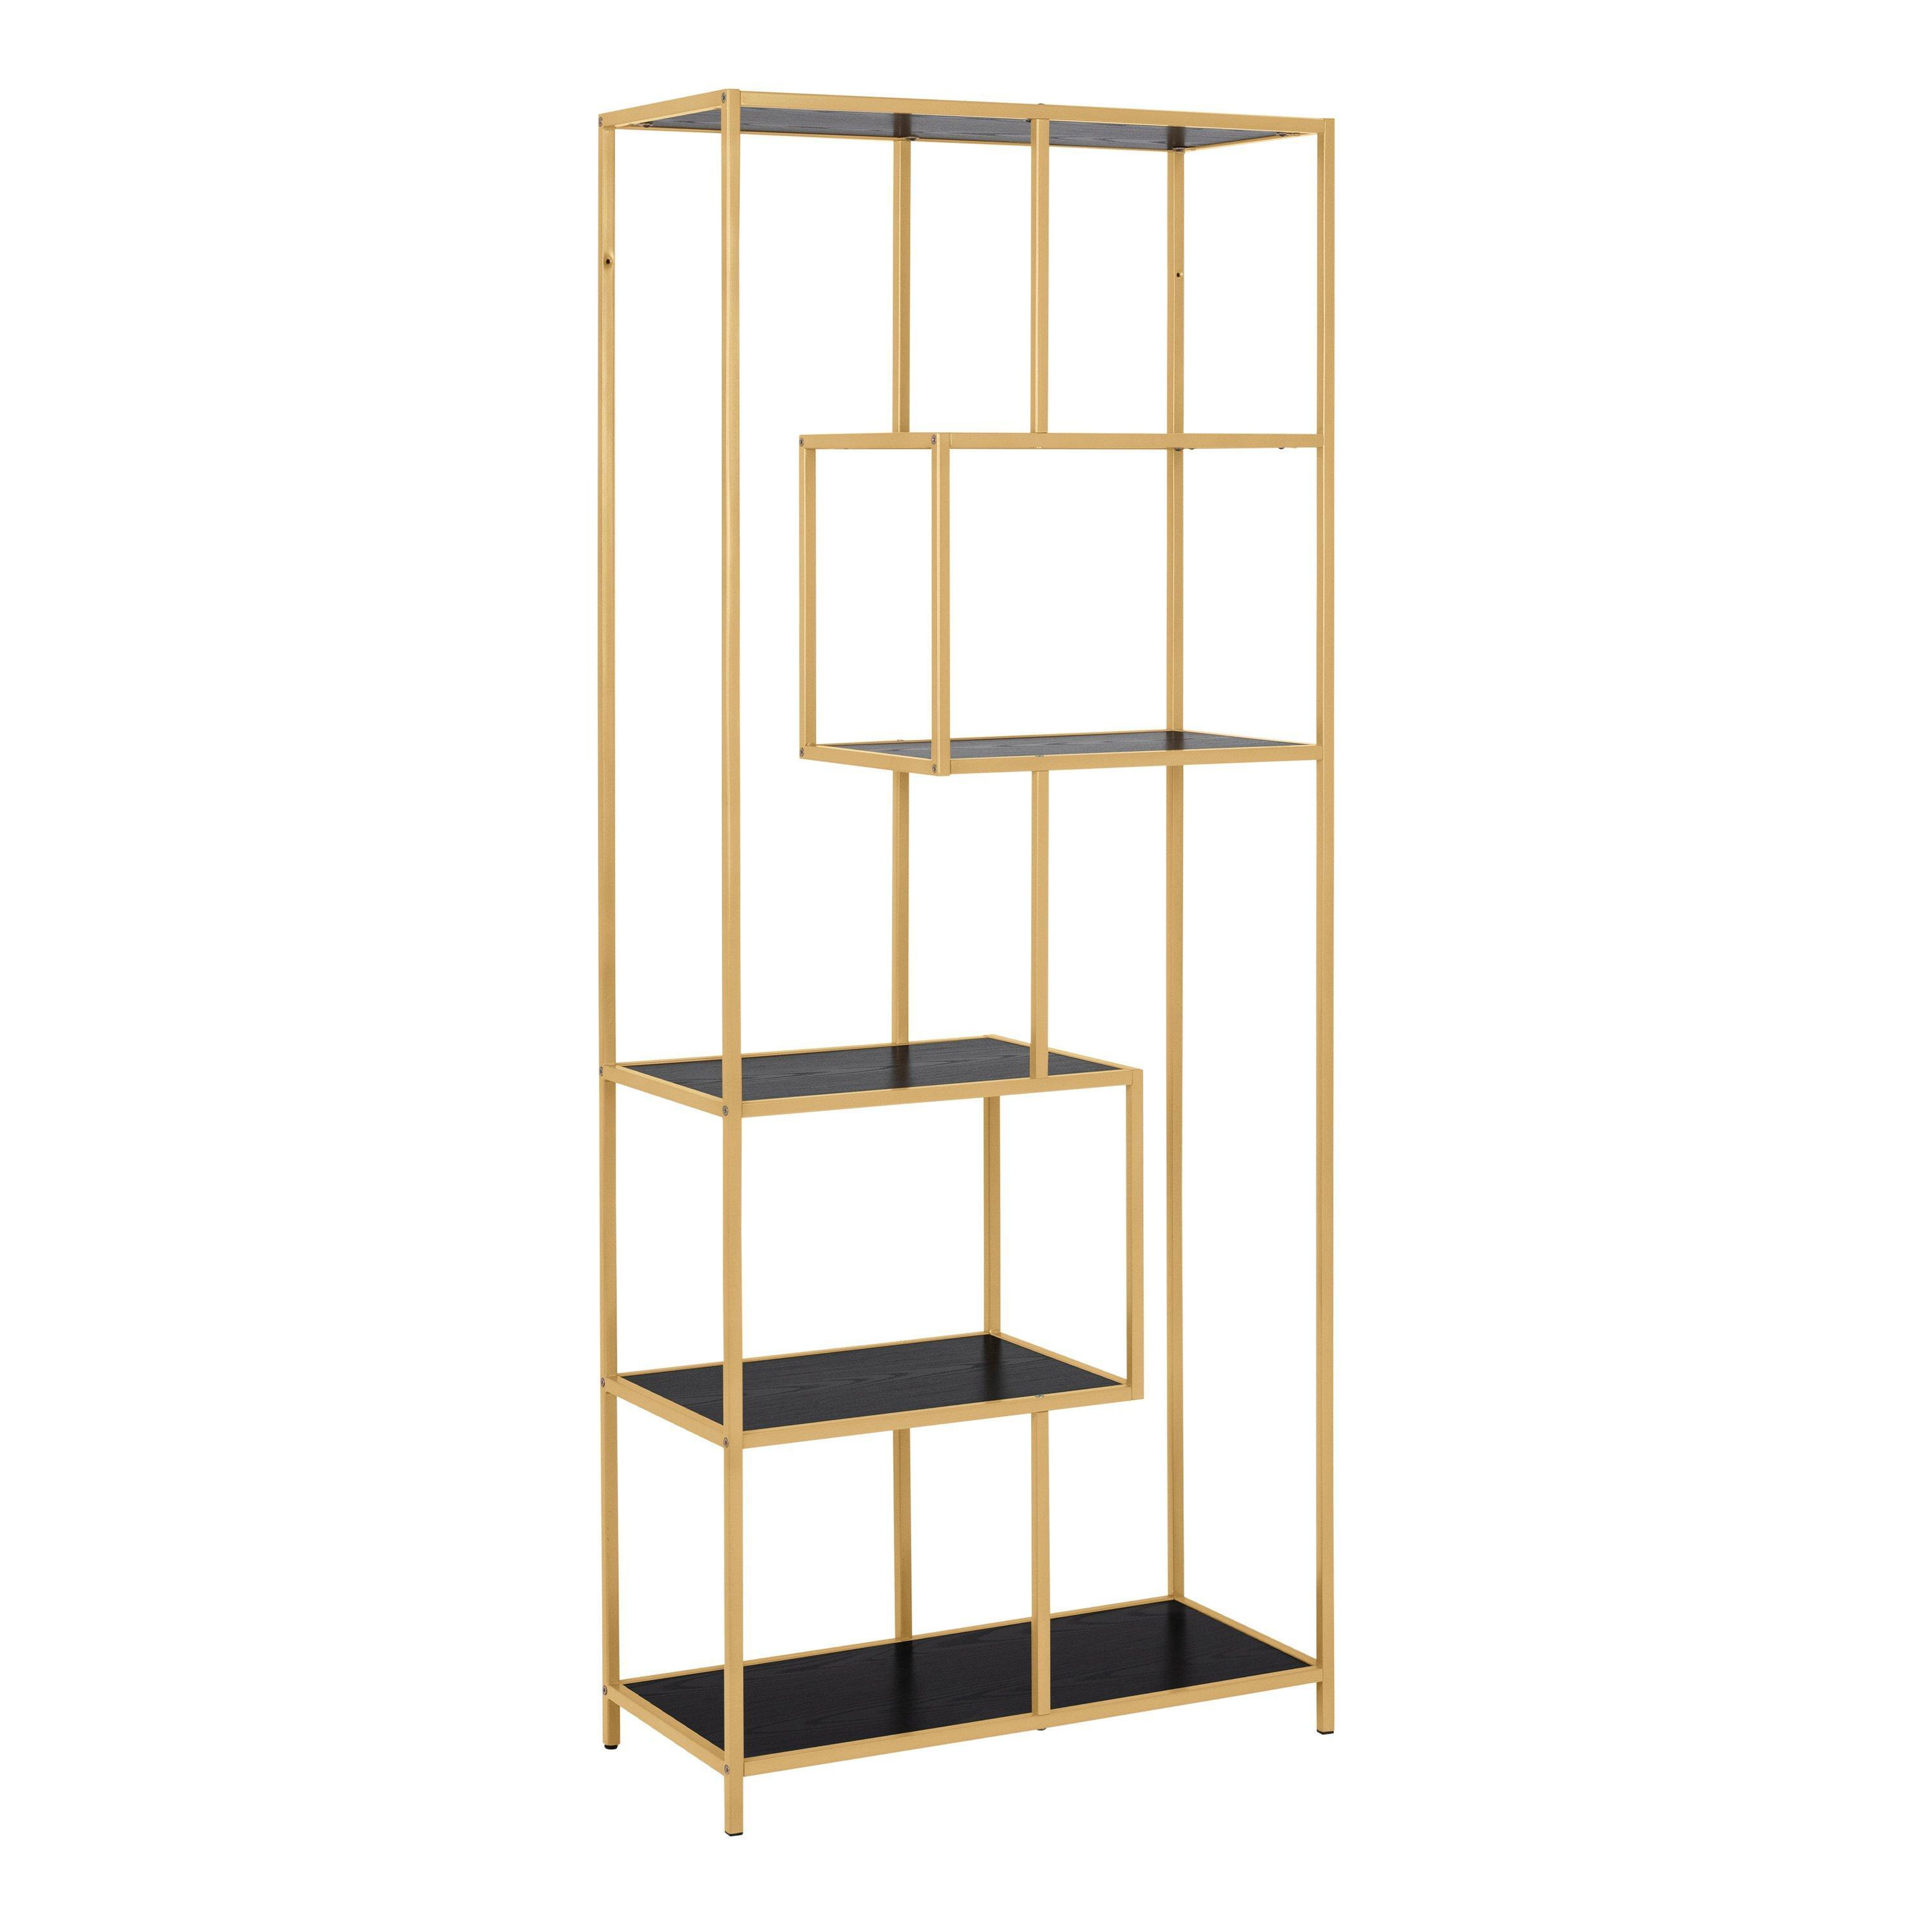 Seaford Tall Gold Metal Bookcase with 5 Black Shelves - image 1